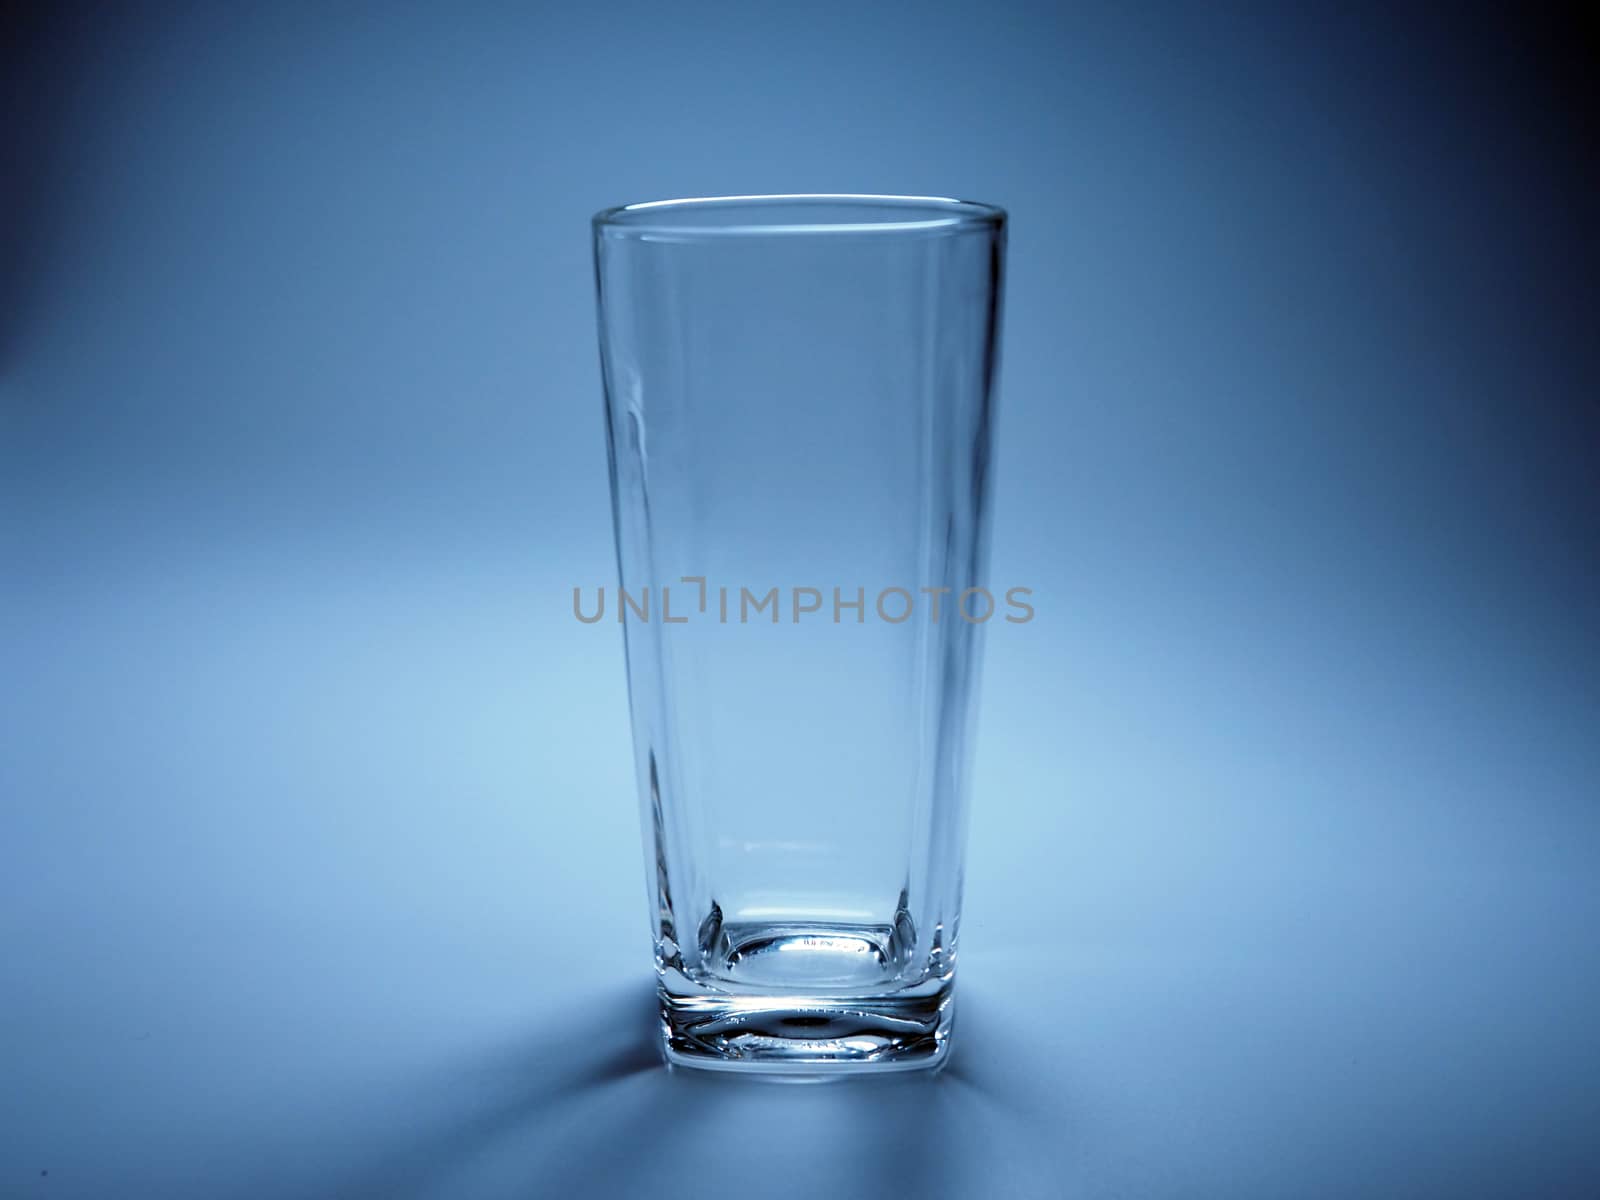 Empty glass On a blue background. by Unimages2527